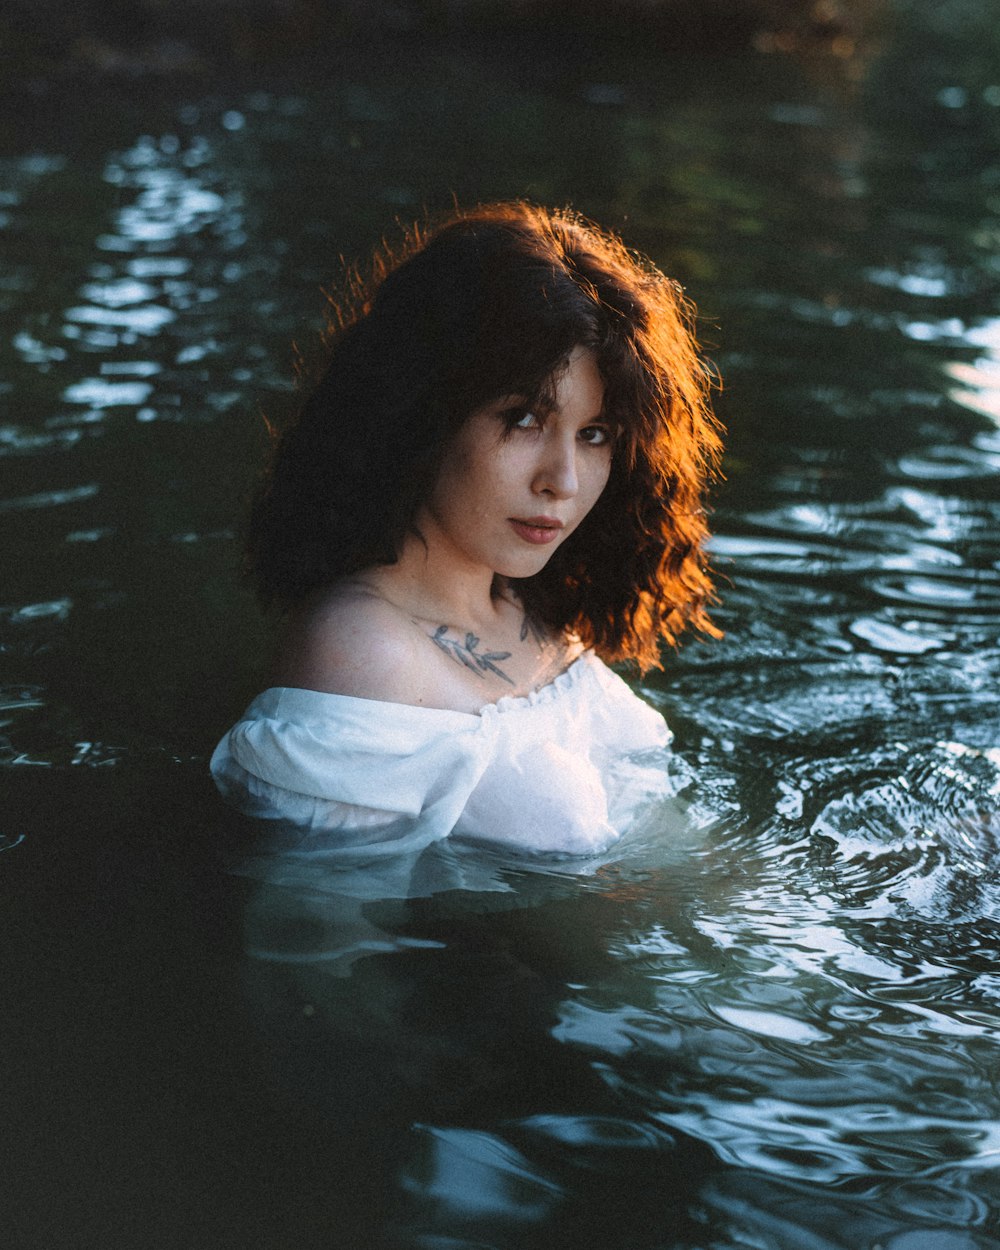 a woman in a white shirt in a body of water